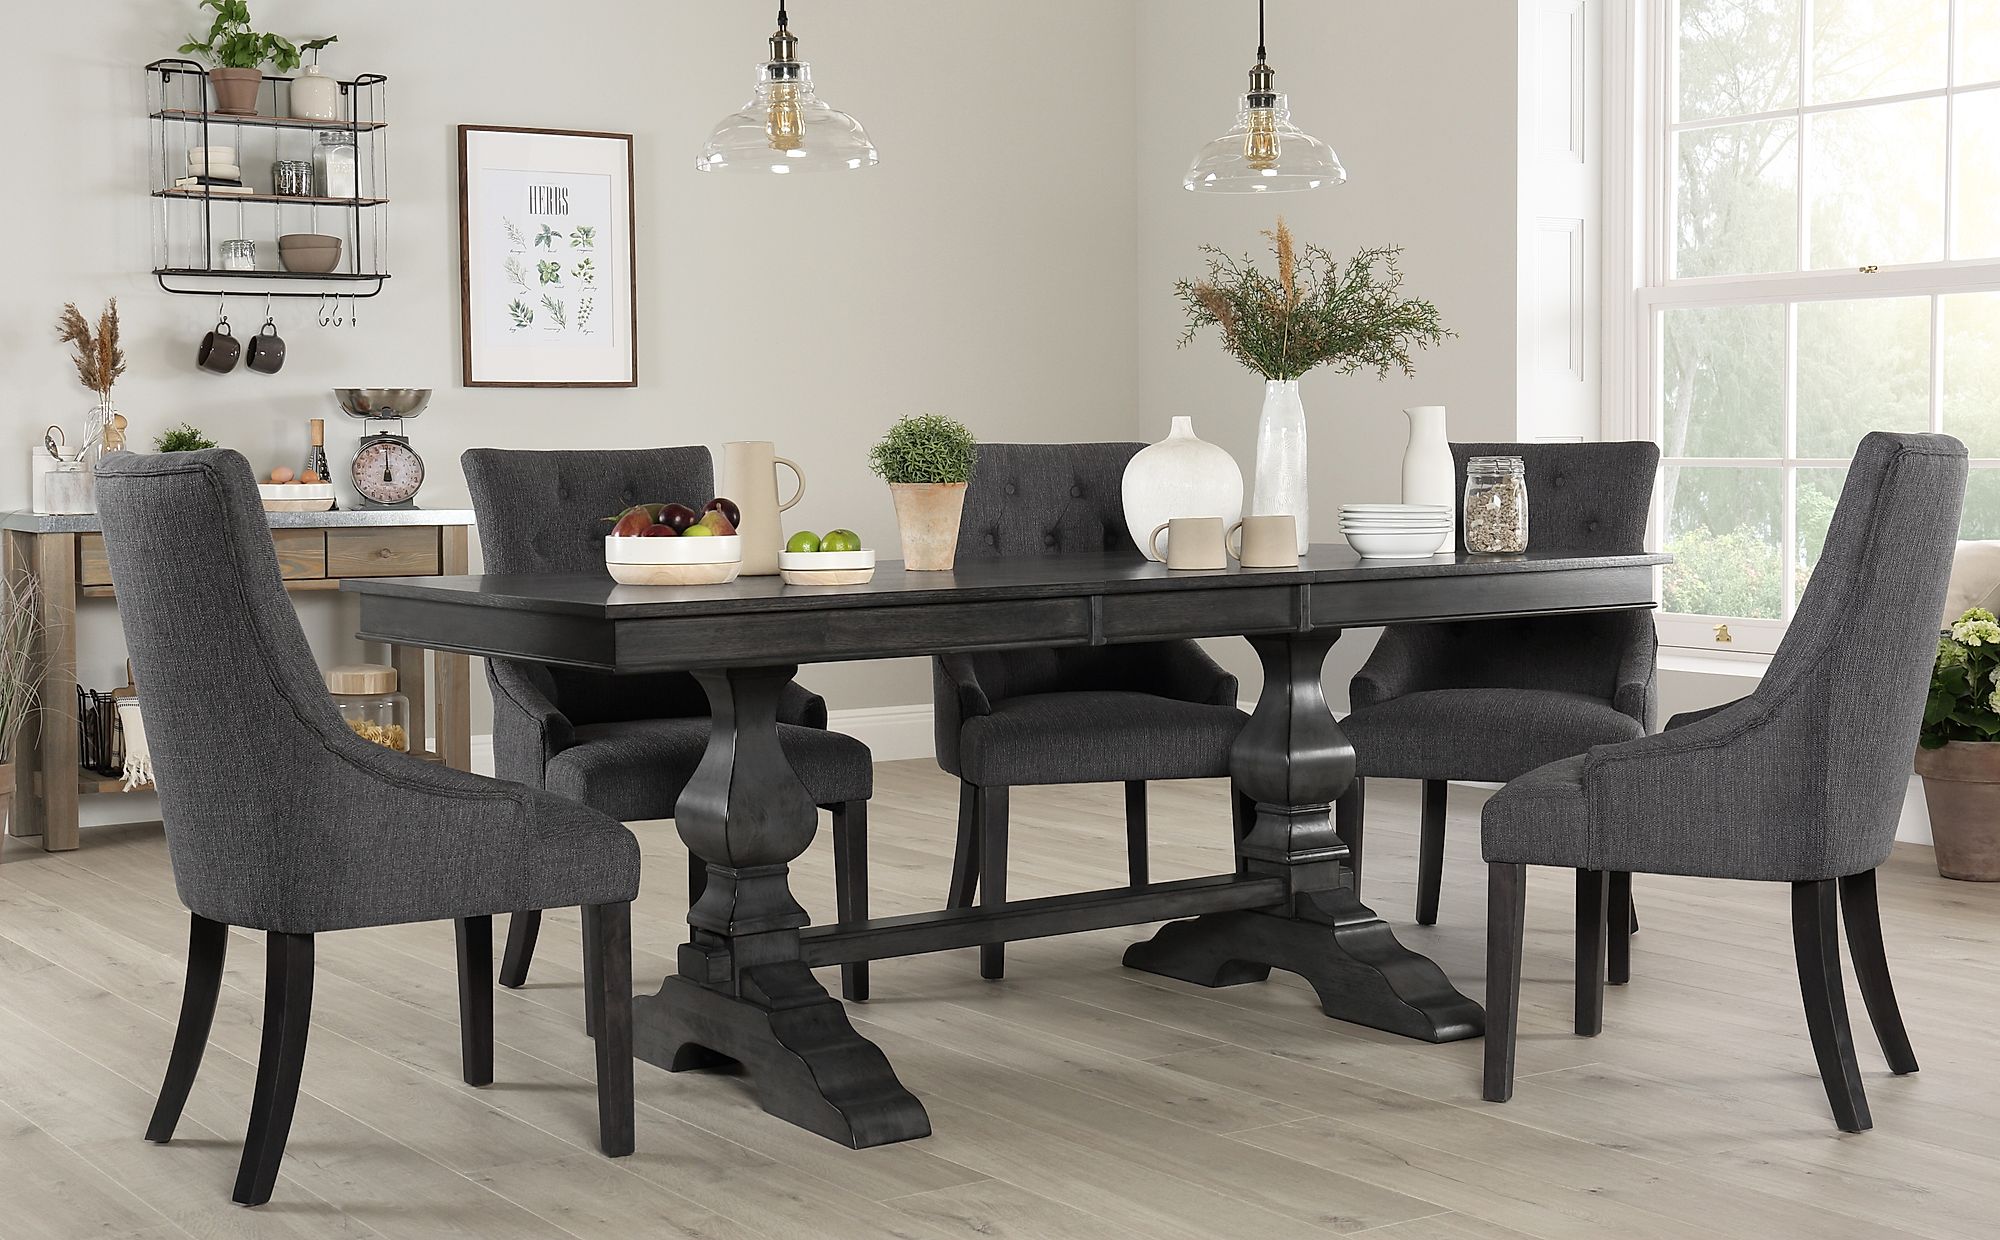 Dining Room Table With Bench In Grey Wood